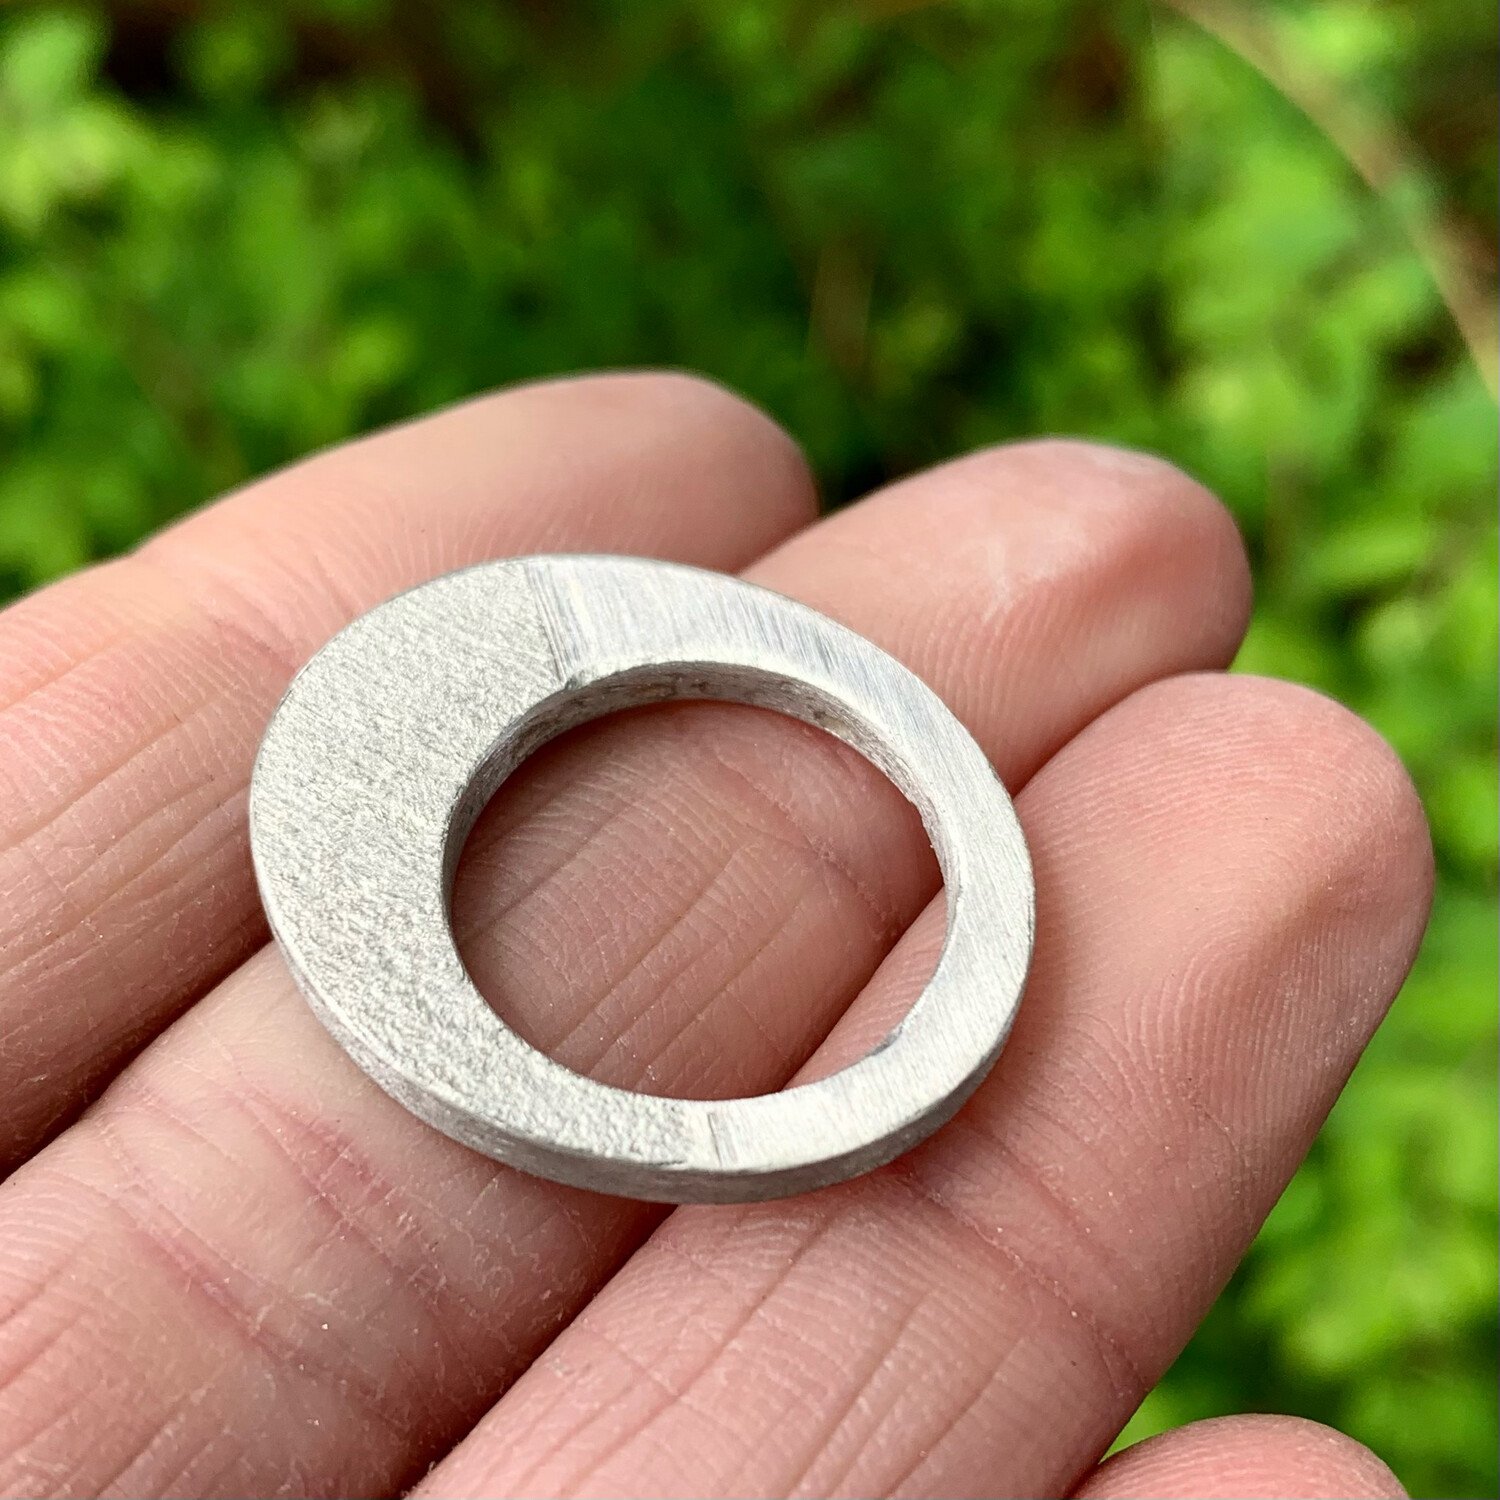 Make a Pewter Cast Ring Workshop - One to One - 1 Day